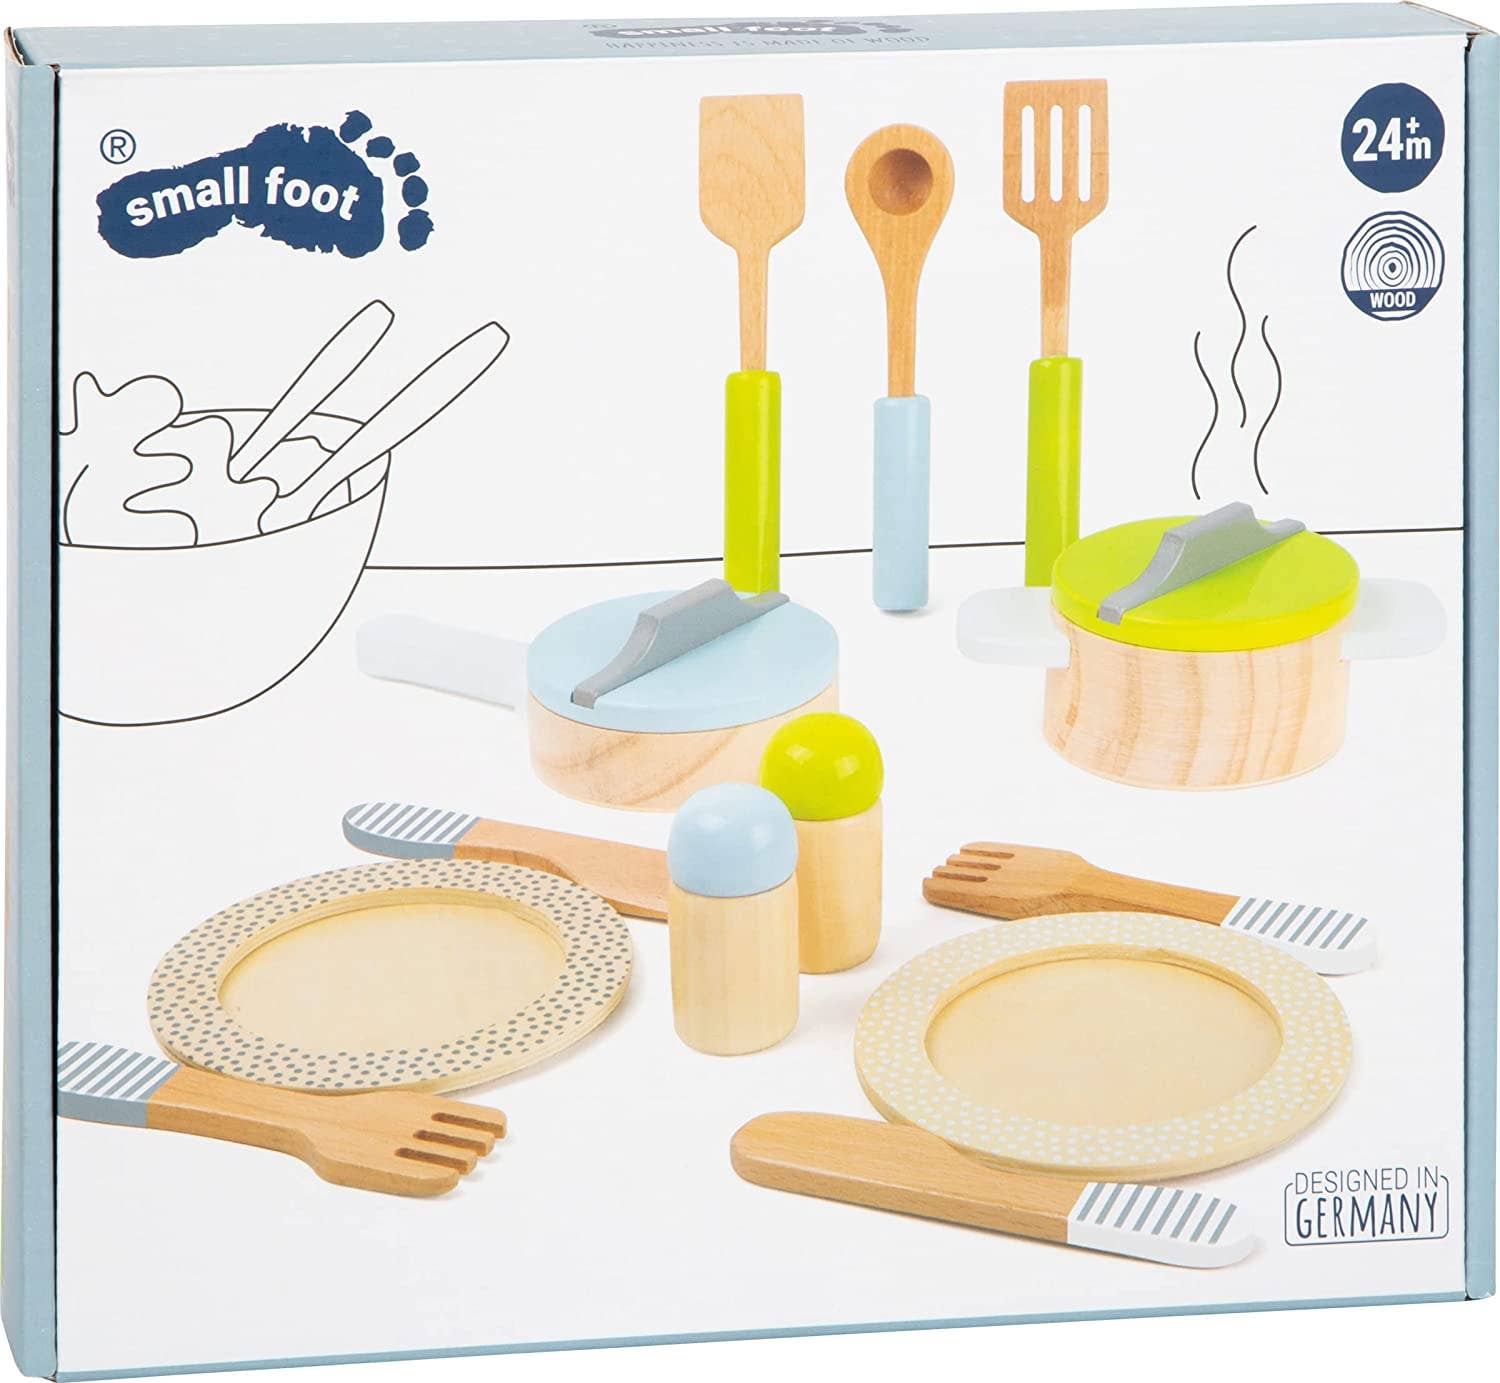 Hauck Toys - Small Foot Crockery & Cookware Playset